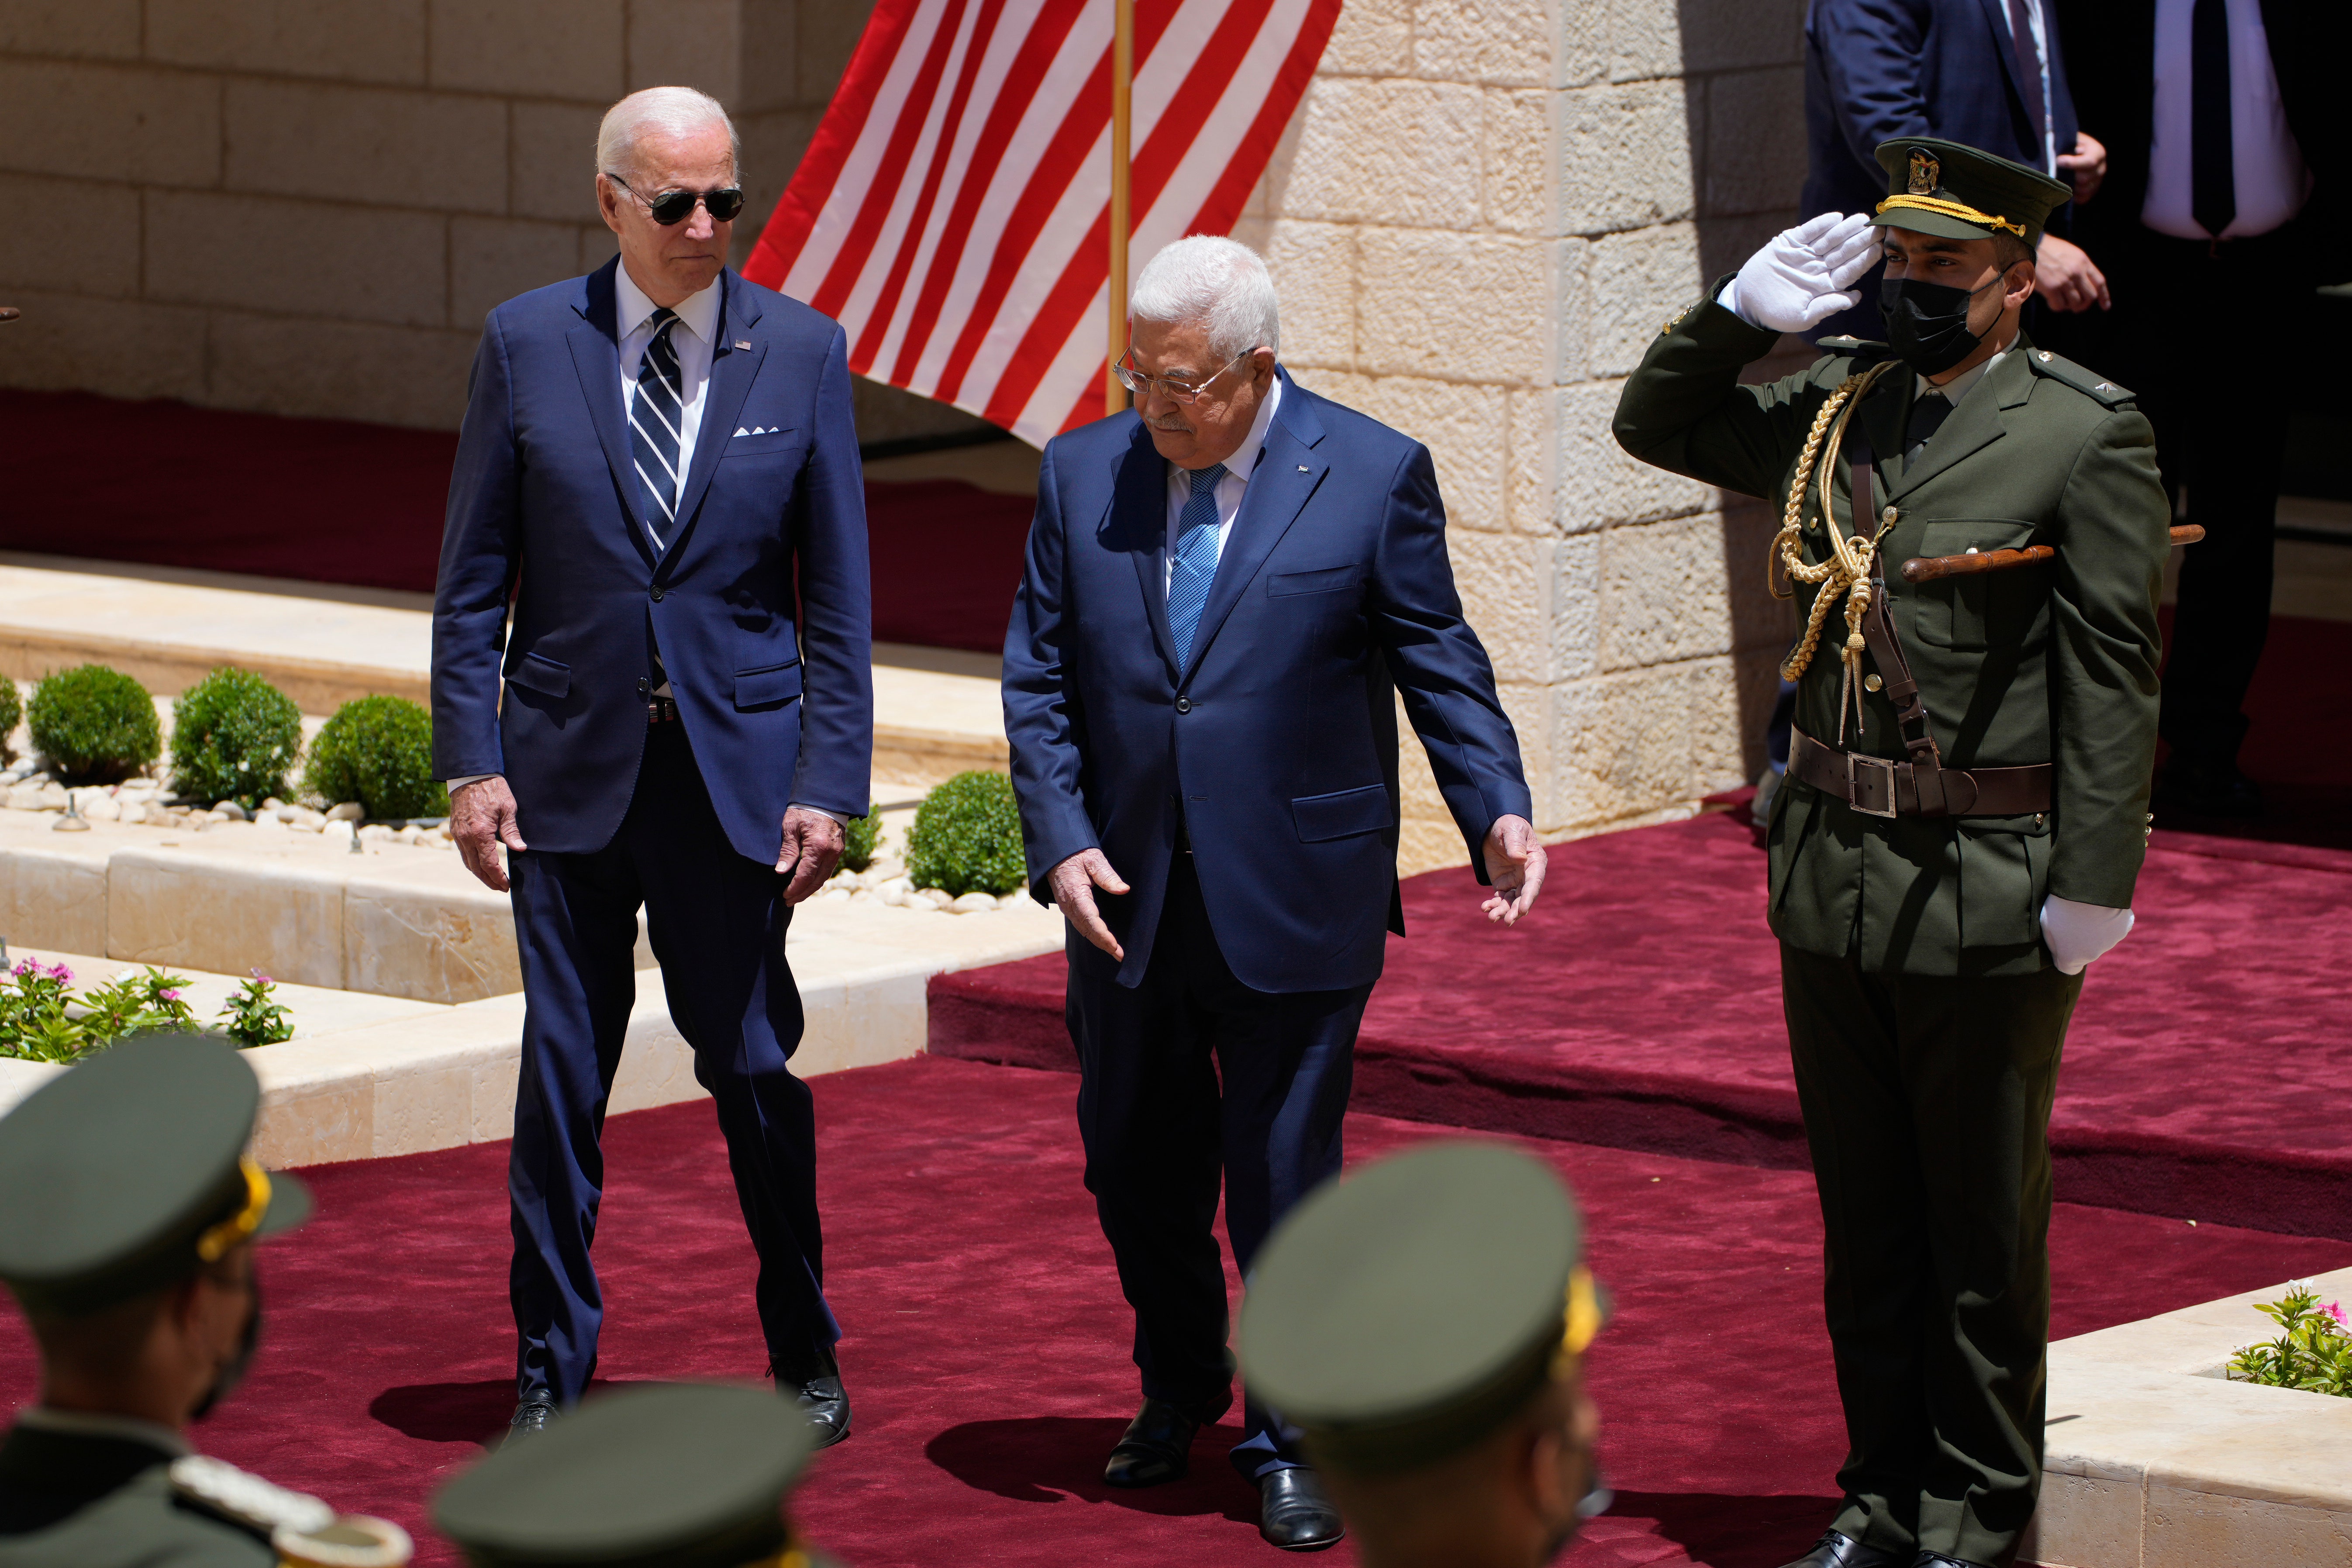 Biden reverses Trump policy on aid to Palestinians, fails to condemn recent terror wave against Israelis